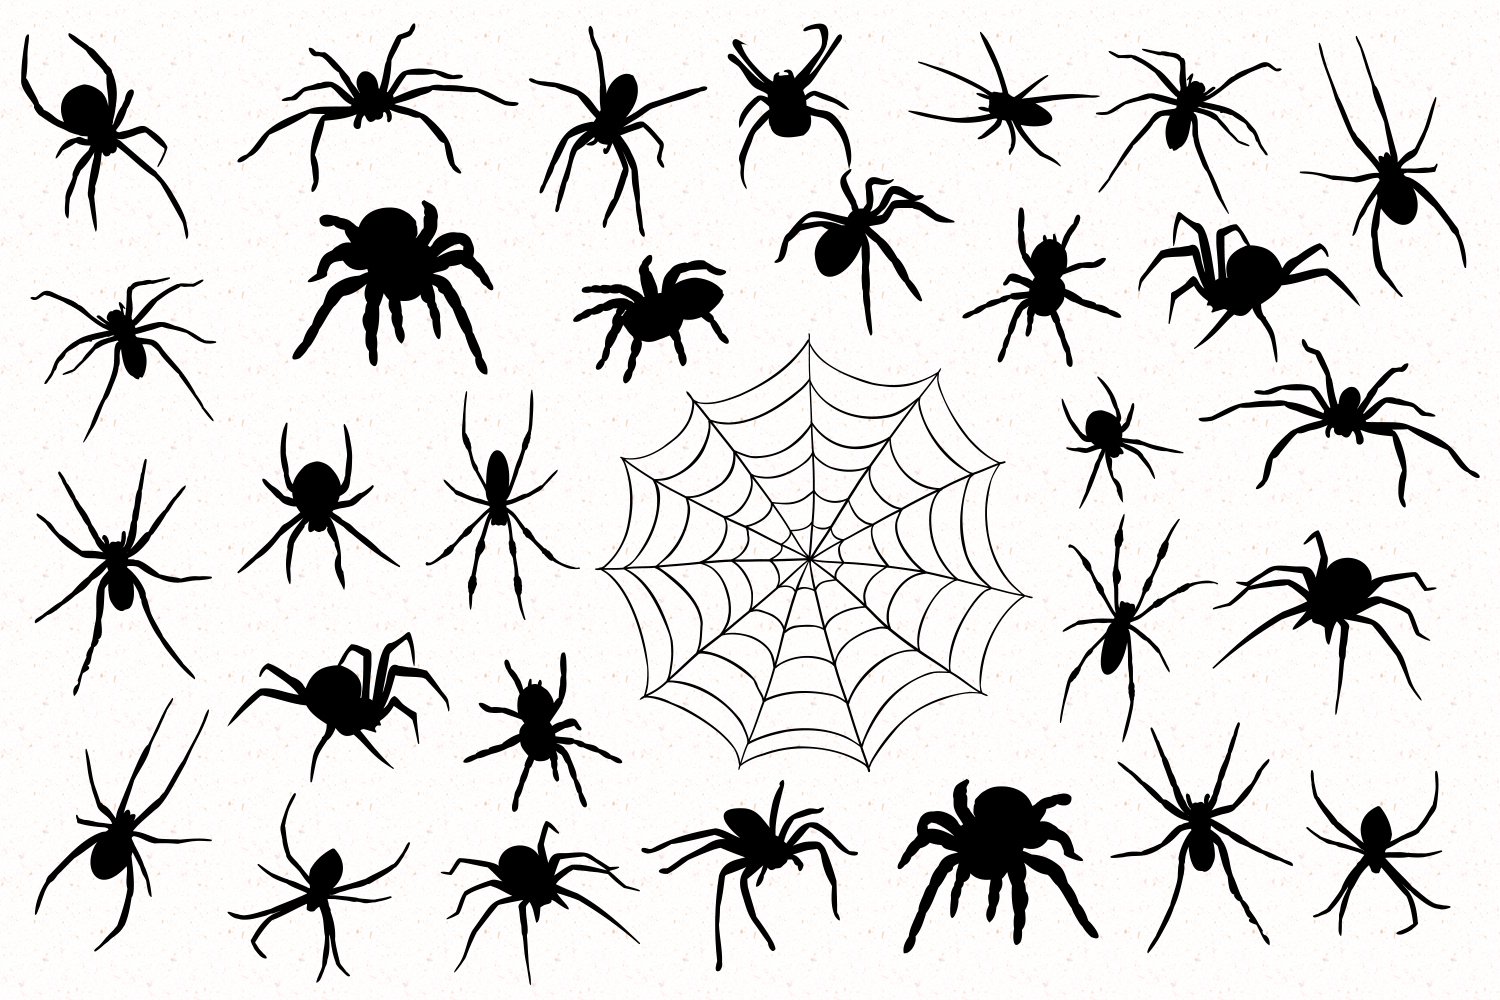 Nice black spiders collection.